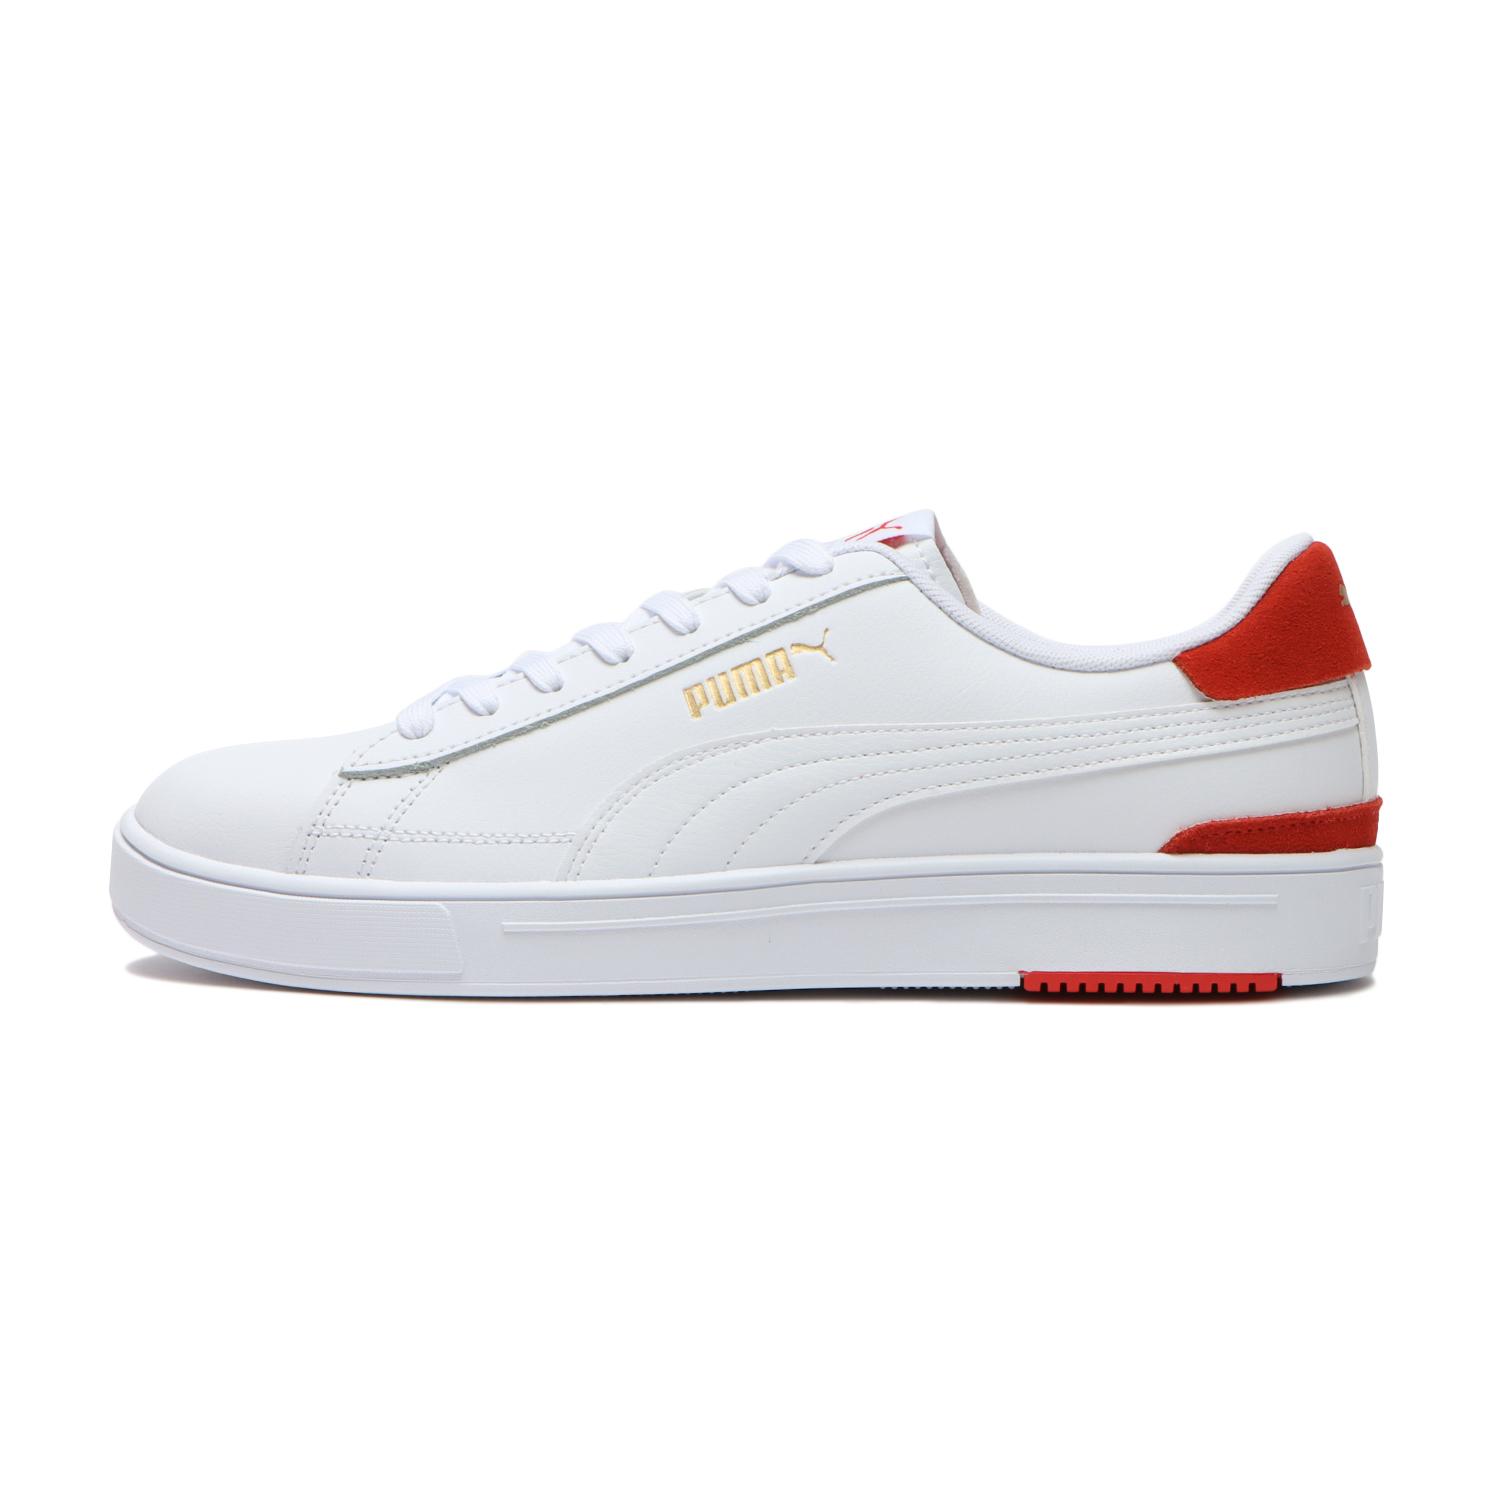 【PUMA】 プーマ PUMA SERVE PRO プーマ サーブ プロ 380188 03WH/H.RED/GOLD